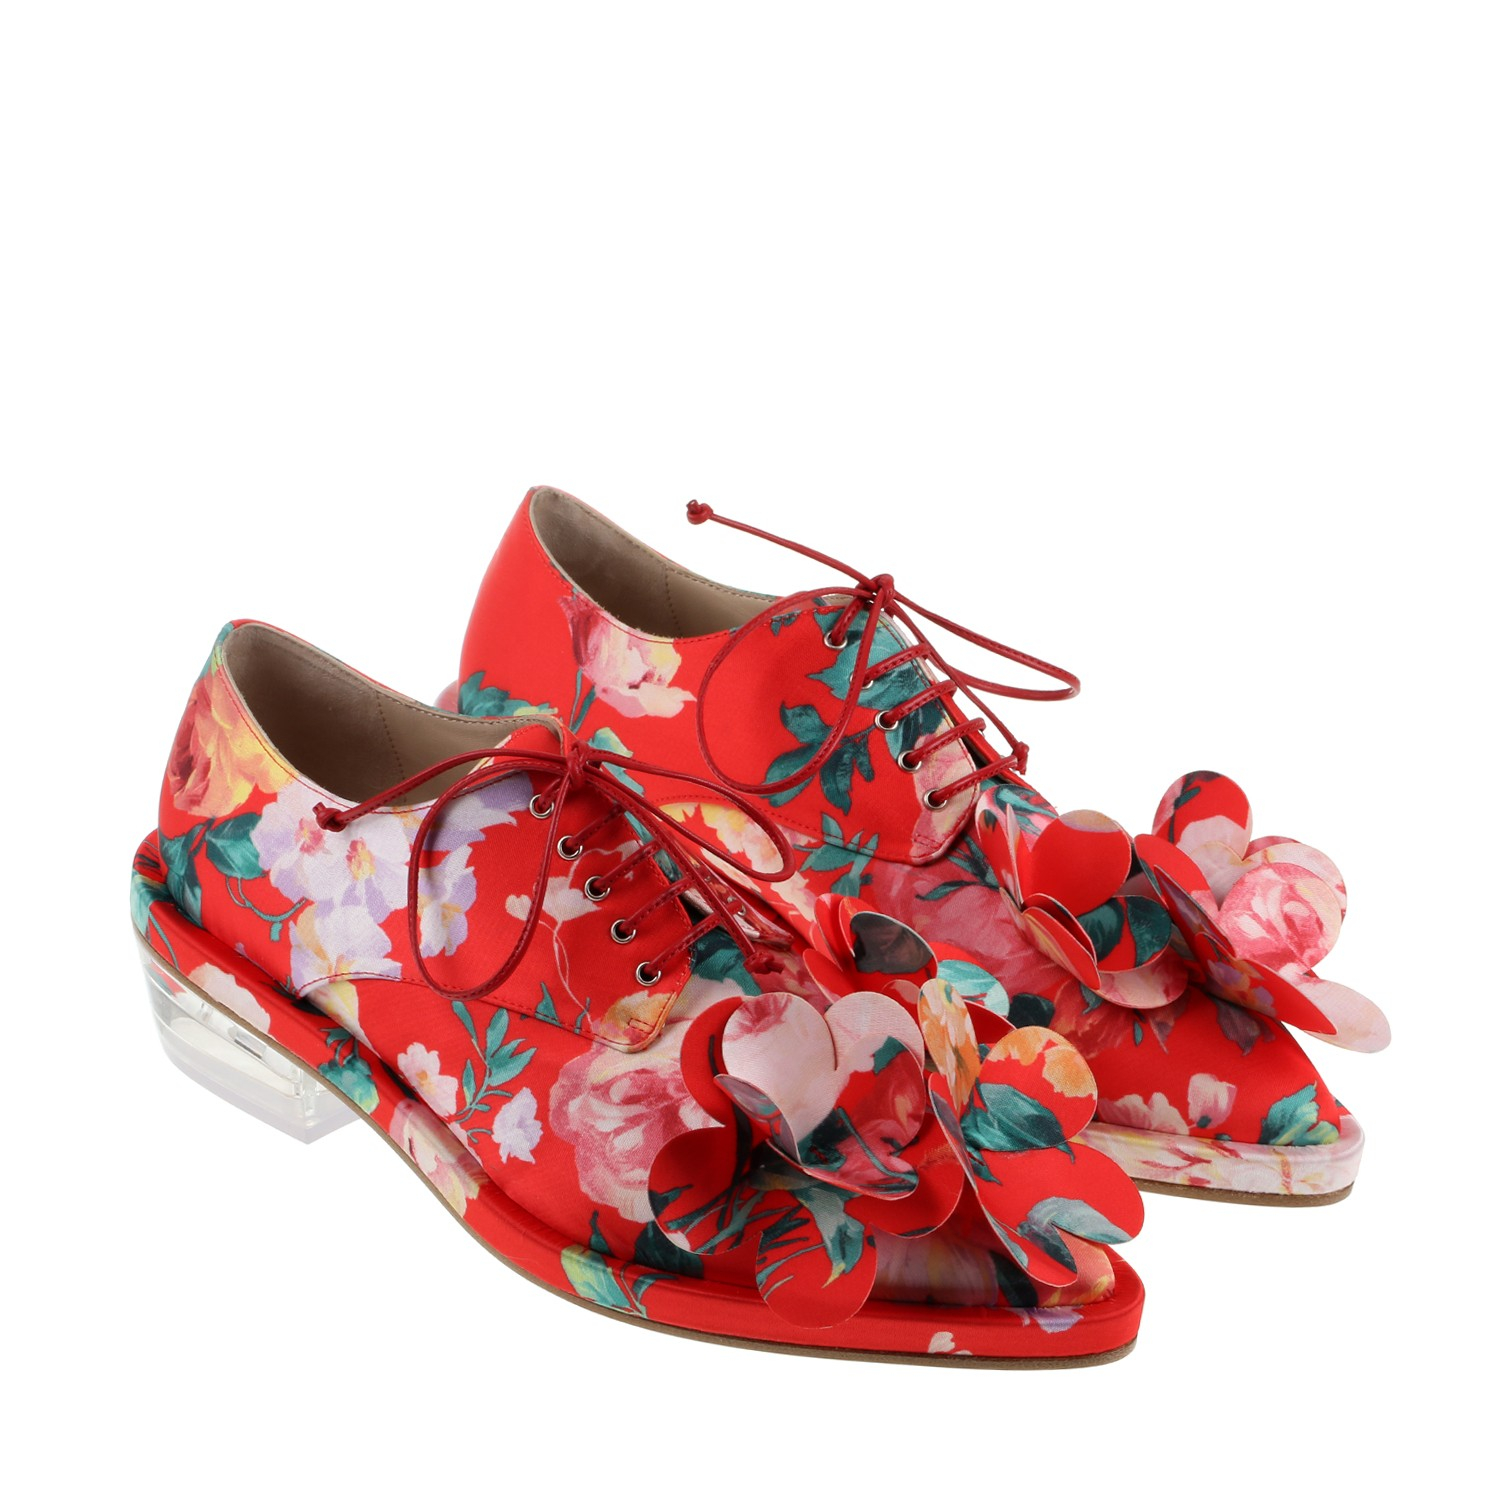 Simone rocha Satin Brogues With Floral Appliqué in Red (Mad Flower) | Lyst